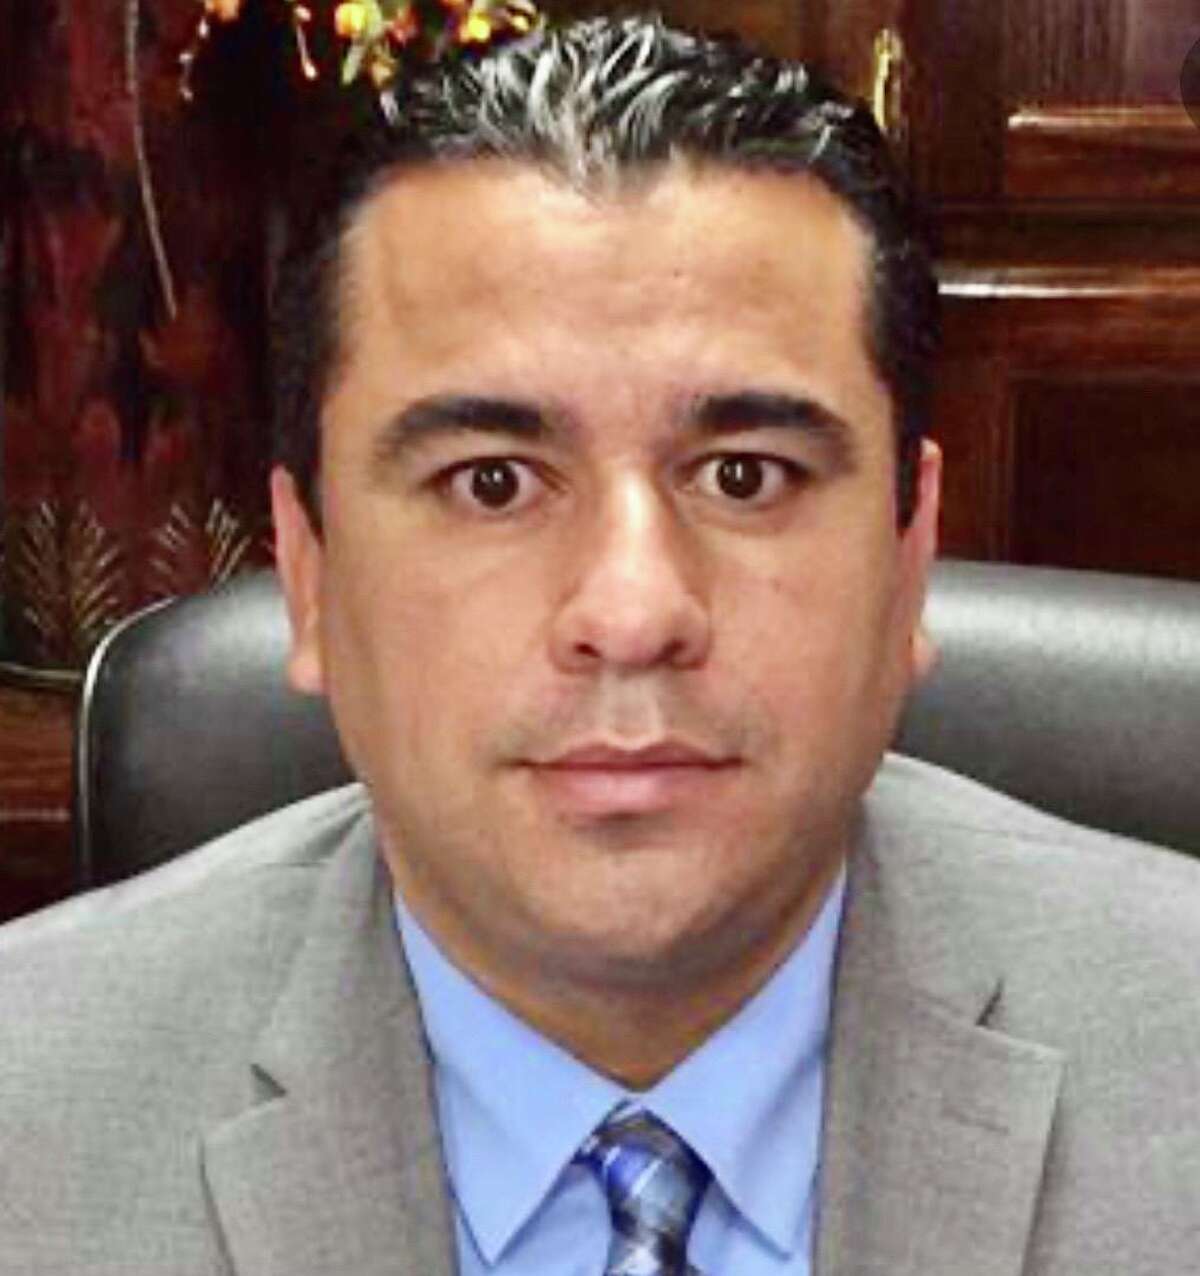 Southside ISD’s Board of Managers named Rolando Ramirez, superintendent of Valley View ISD, as its lone finalist for superintendent. He will replaced Mark Eads, who plans to retire this summer.